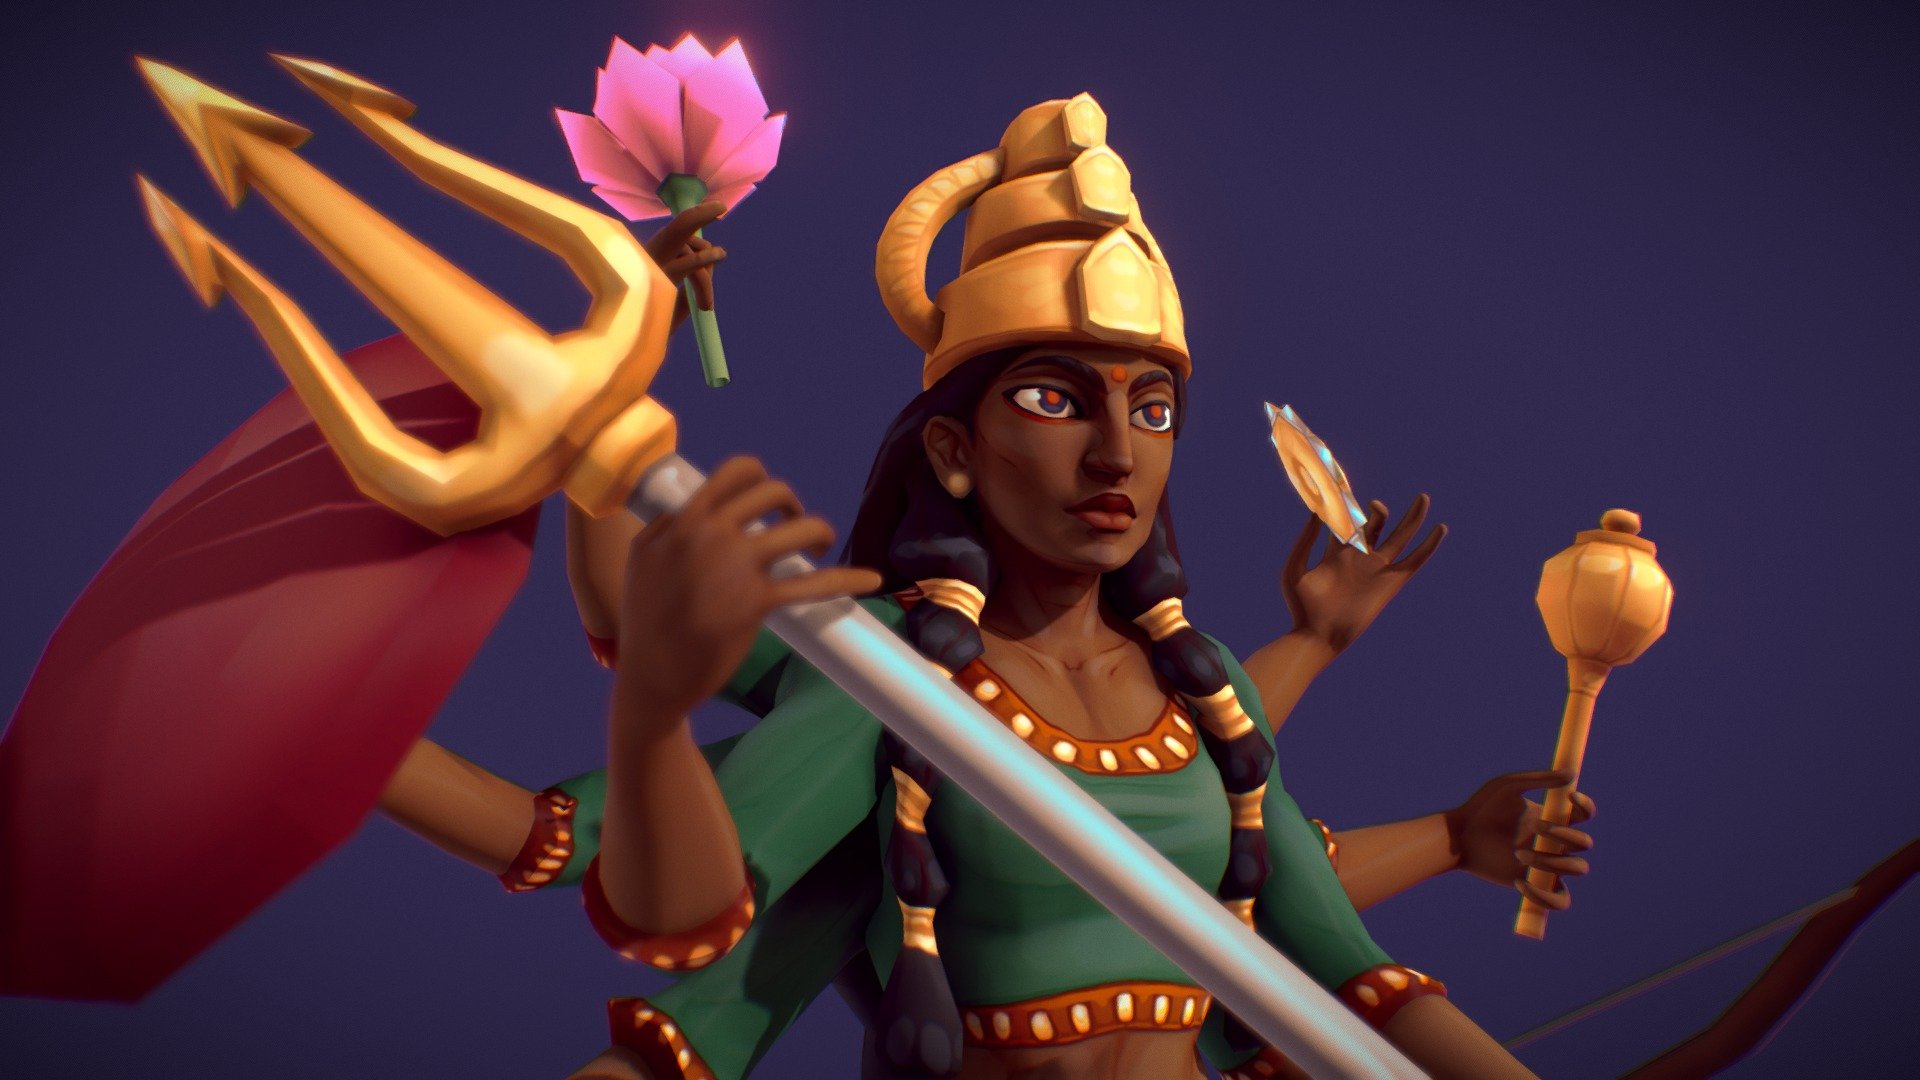 My rendition of the hindu goddess Durga for one of my school projects! We drew a lot of inspiration from Balinese hinduism in both the aesthetics and the story 3d model